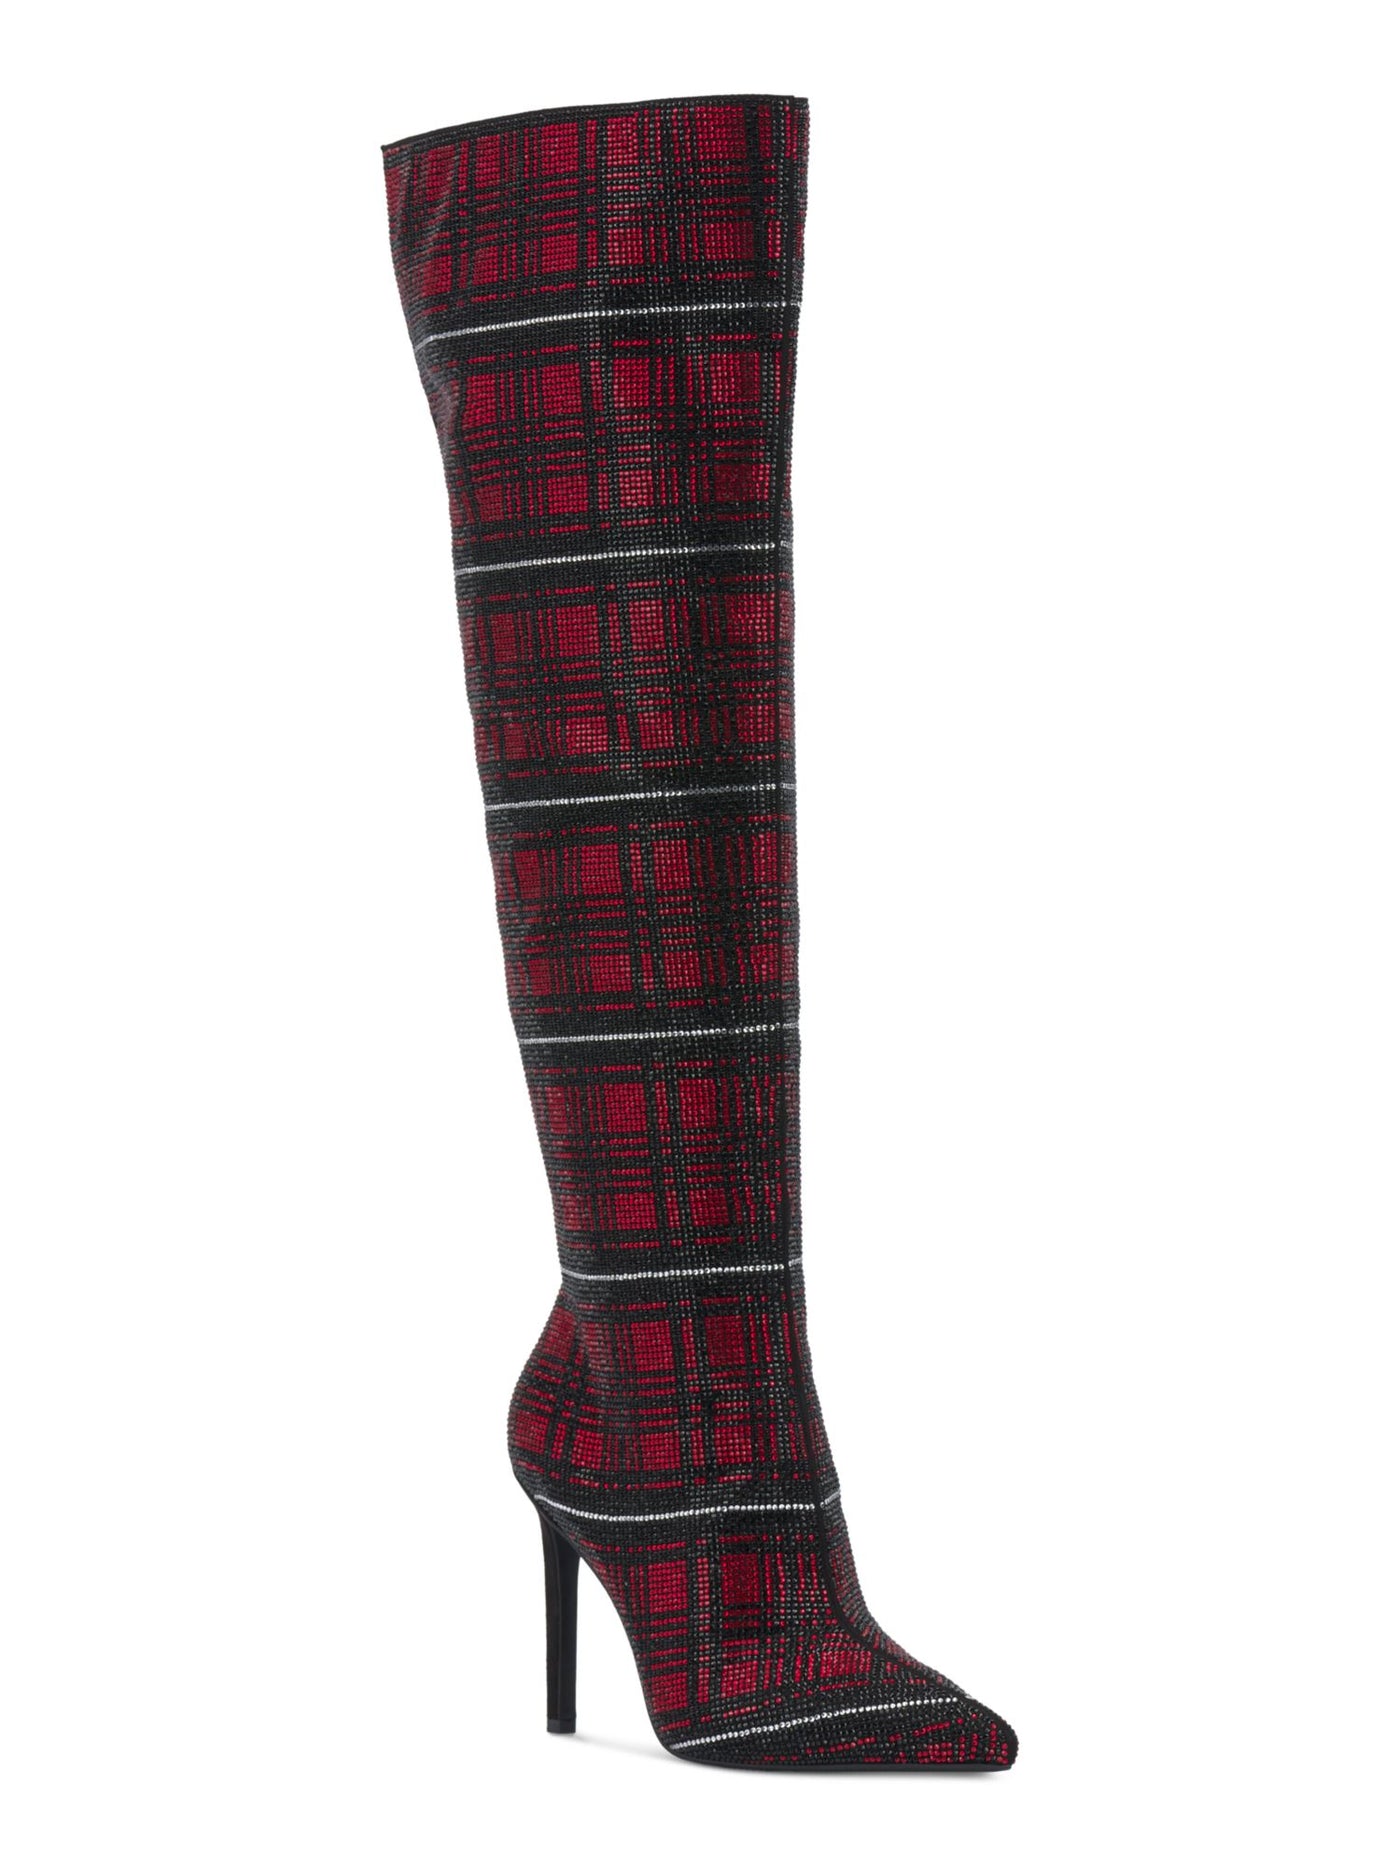 INC Womens Red Plaid Vented Back Padded Rhinestone Goring Saveria Pointed Toe Stiletto Zip-Up Dress Boots 7 M